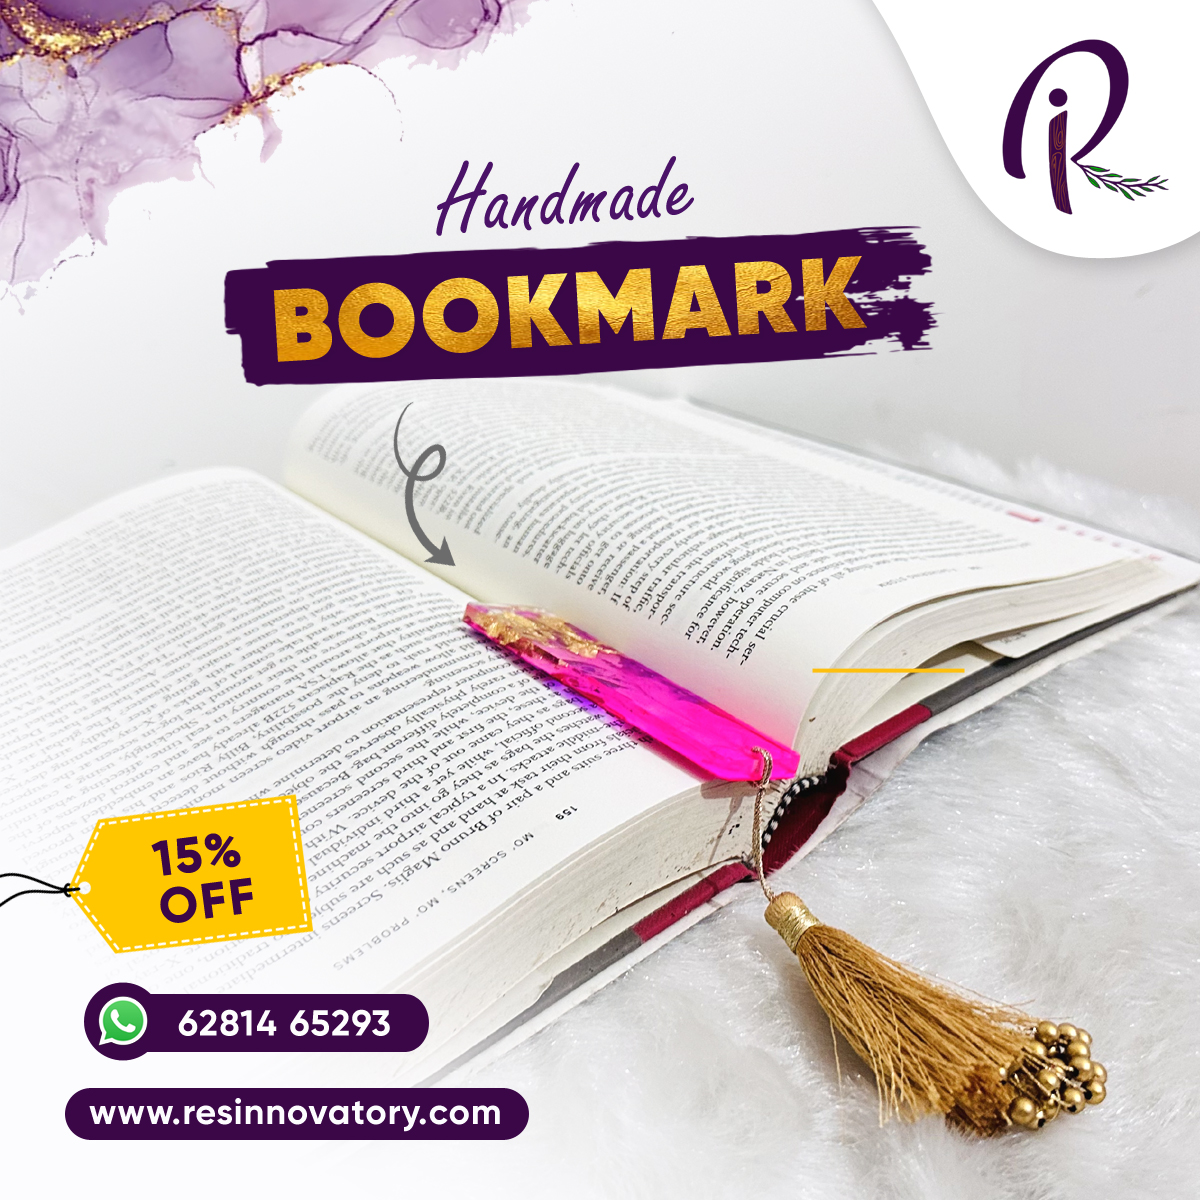 Handmade Resin Bookmark for Gifting & Book Lovers
resinnovatory.com/collections/re…

#resinnovatory #resincoasters #resinart #personalisedgifts #resinframe #resinbookmark #bookmark #bookmarkshop #books #bookshelf #bookslovers #bookstagram